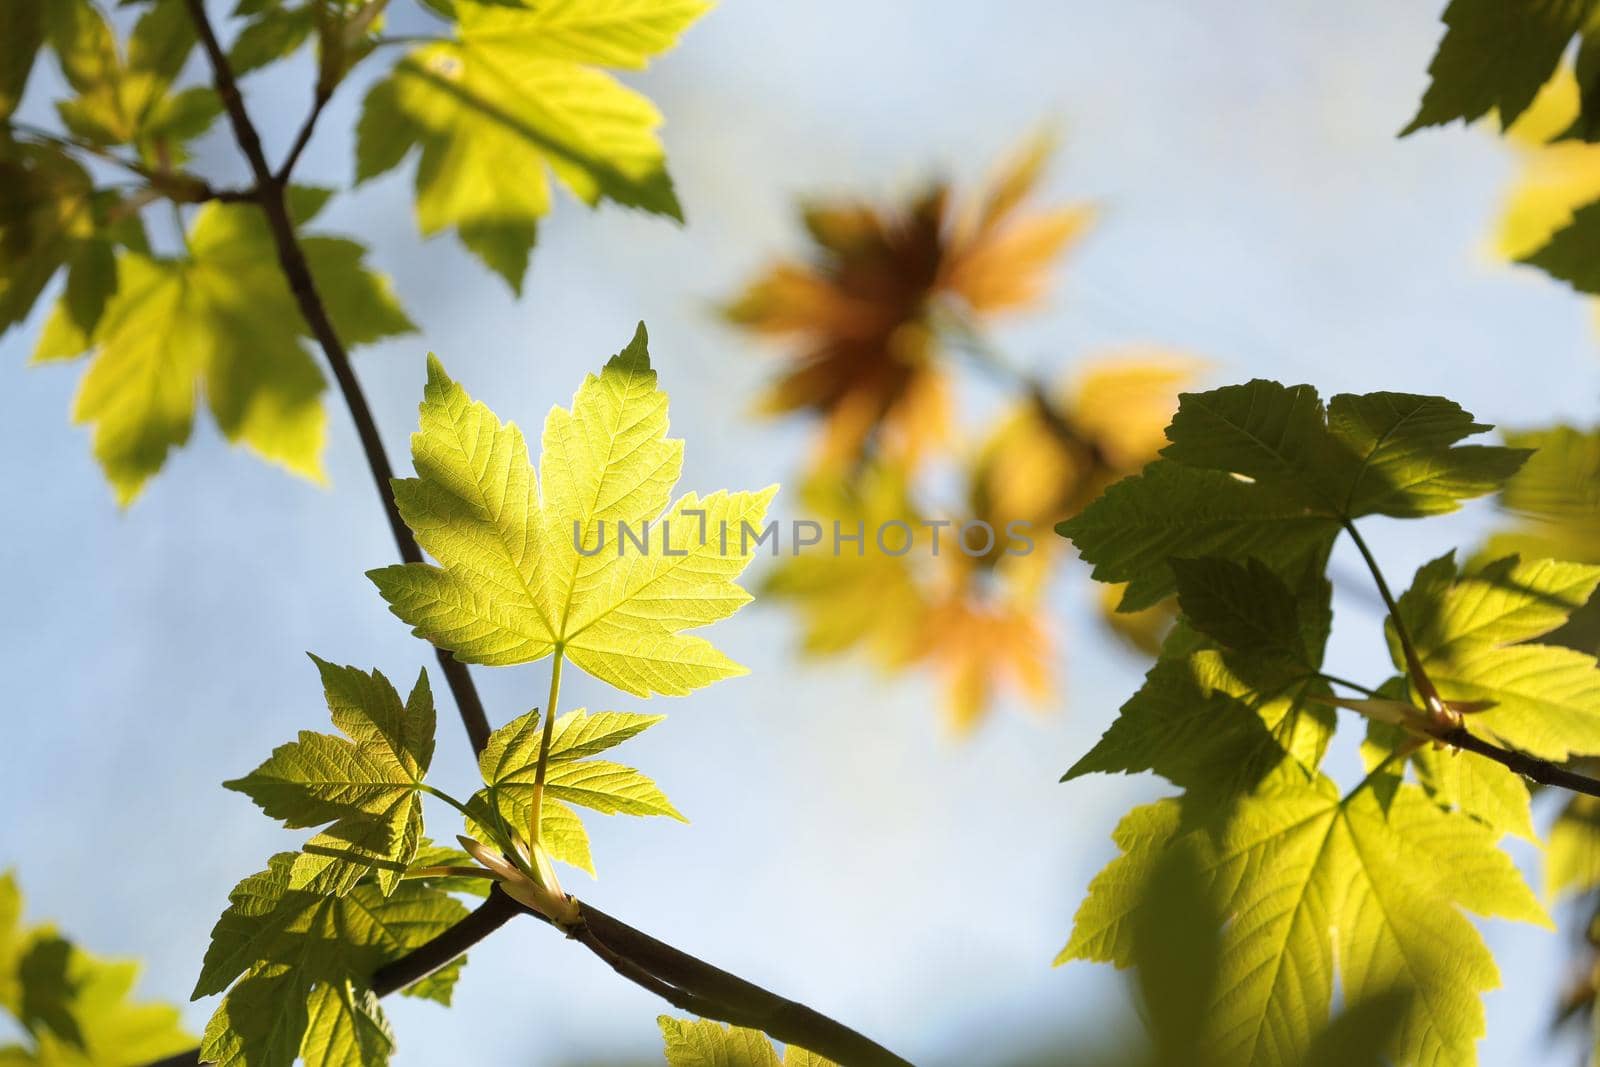 Sycamore maple leaves in the forest.